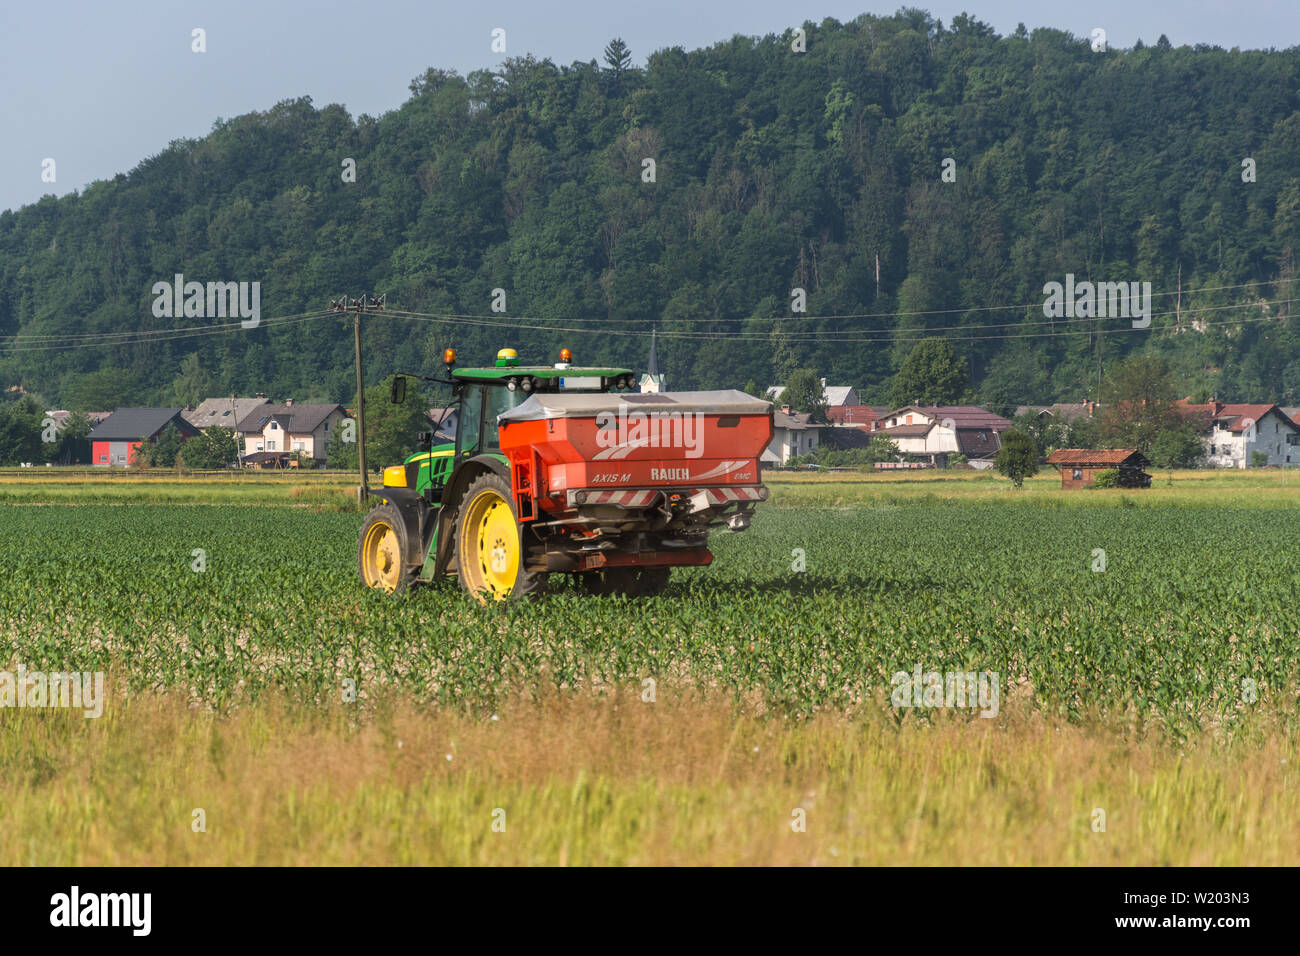 John Deere tractor with red tank in the back spraying on a field Stock Photo